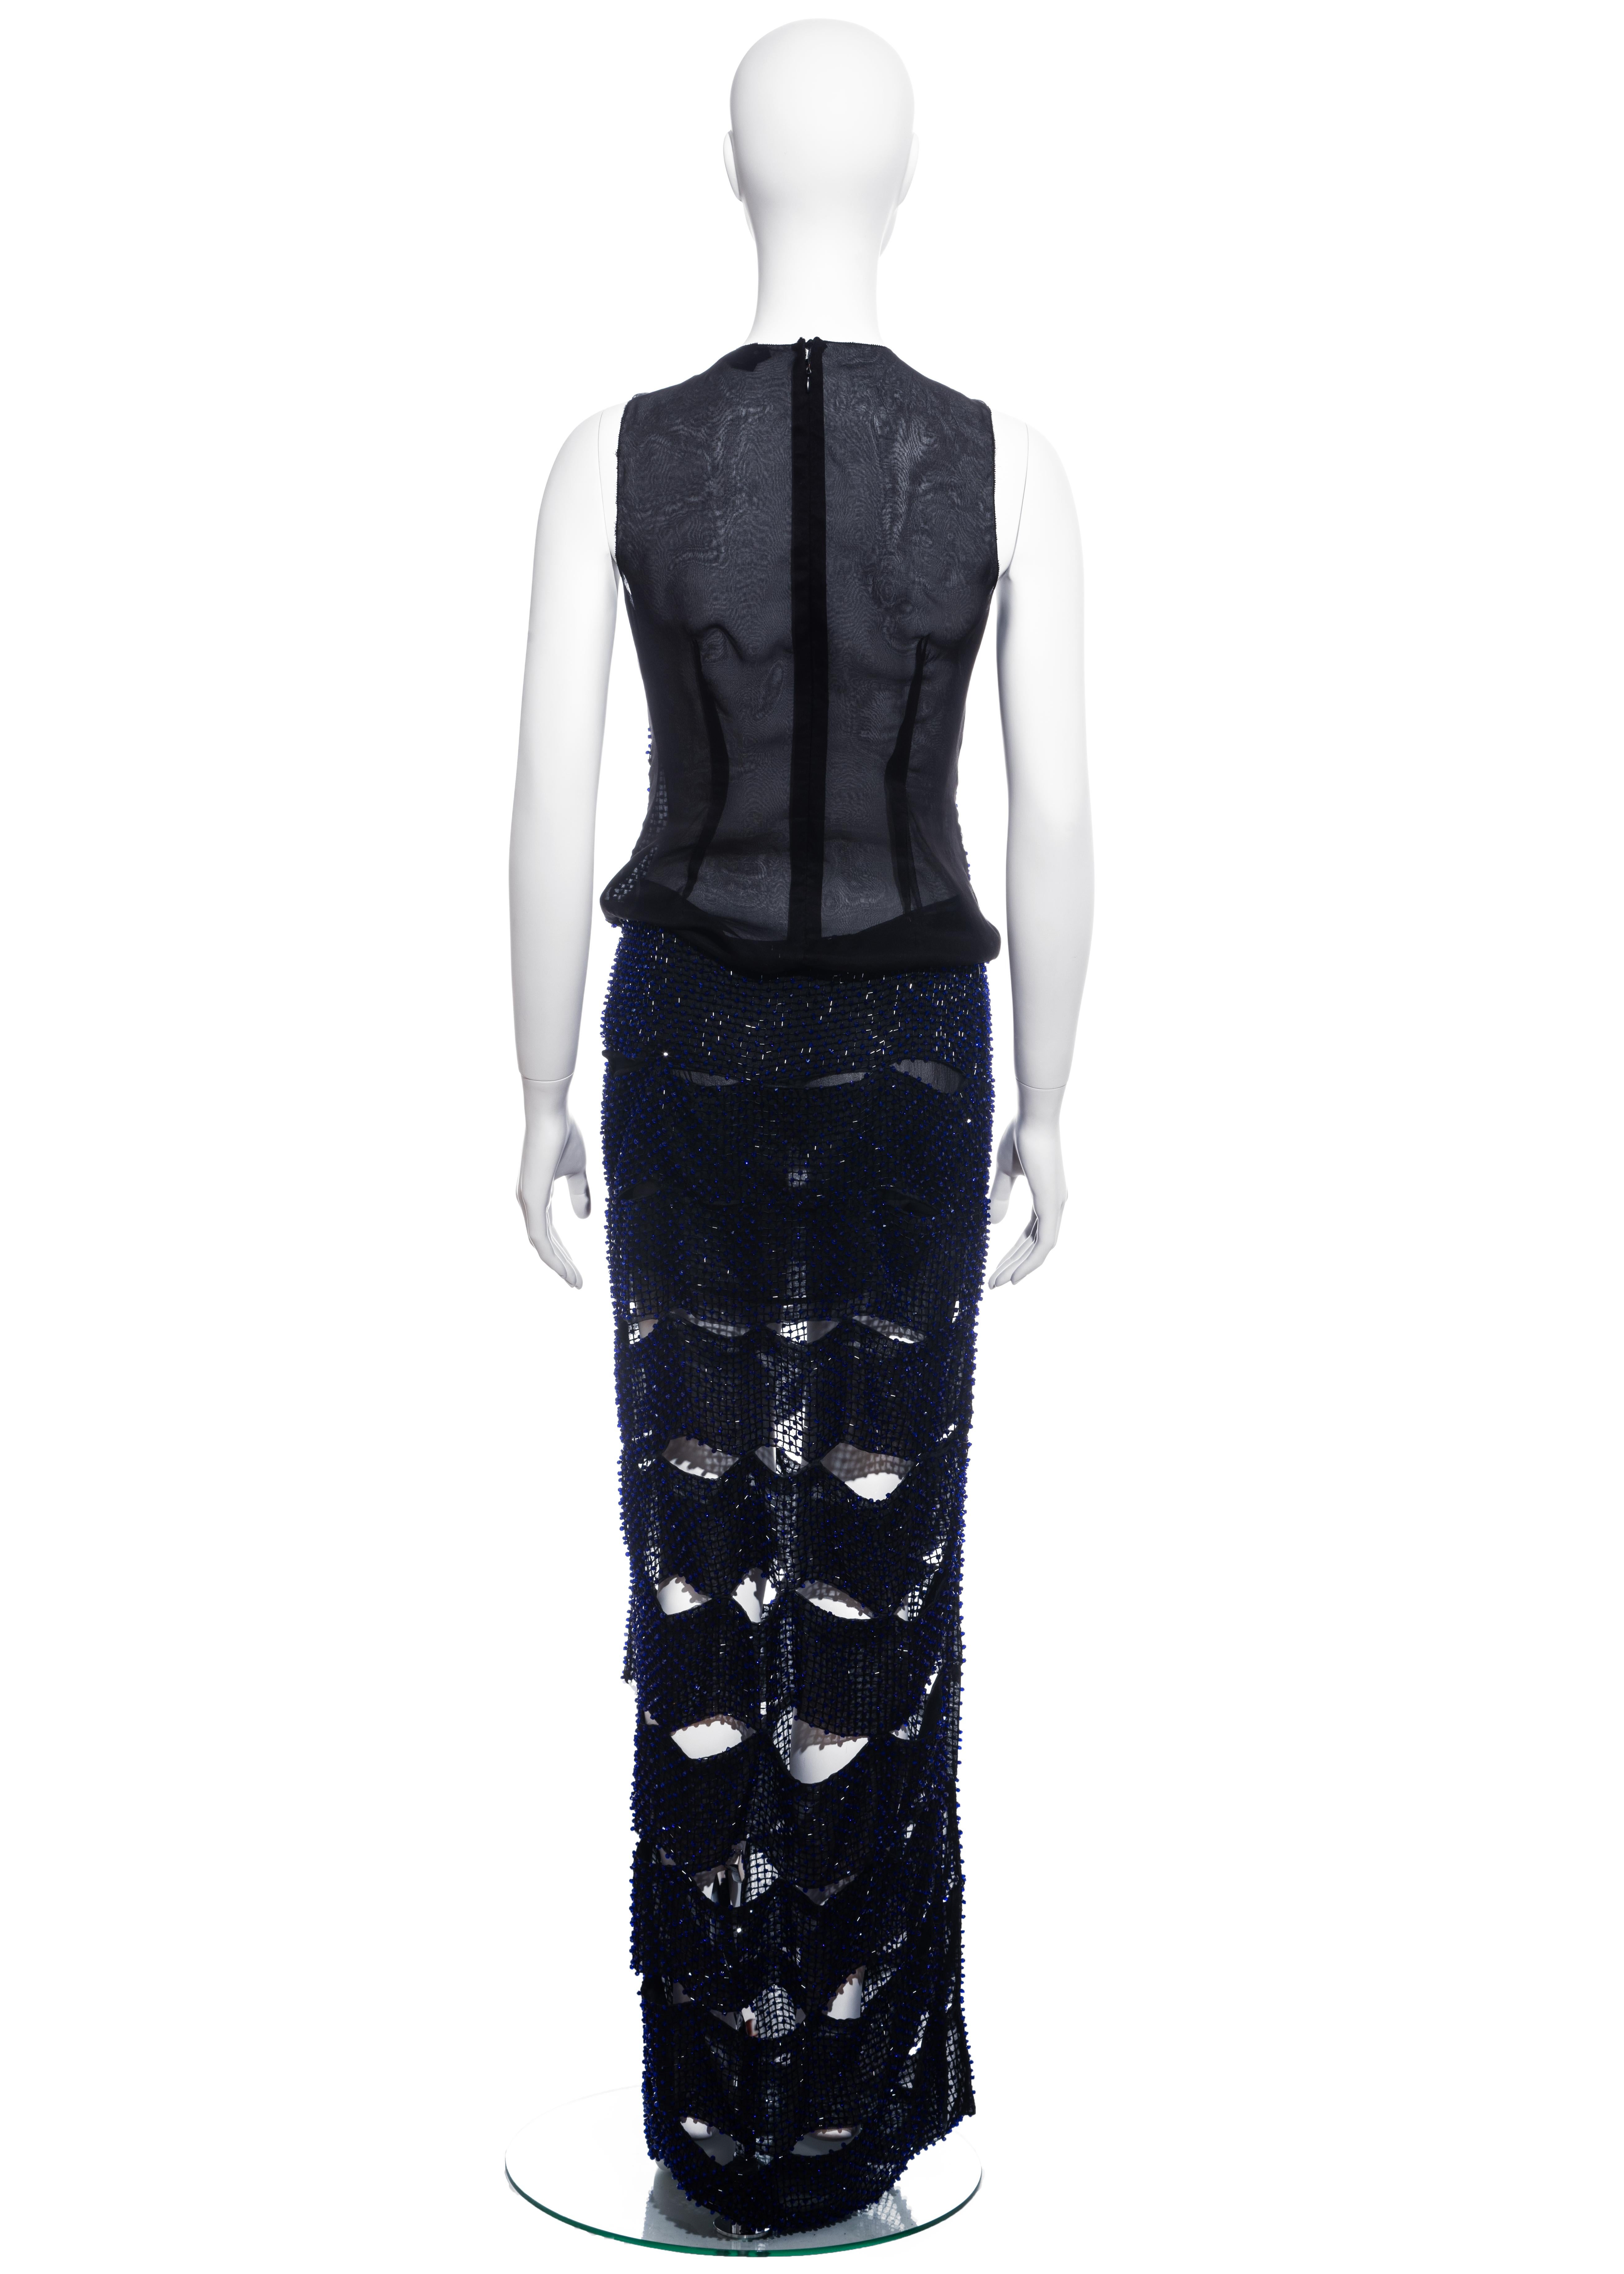 Tom Ford silk organza evening dress in a lattice of blue glass beads, ss 2013 For Sale 1